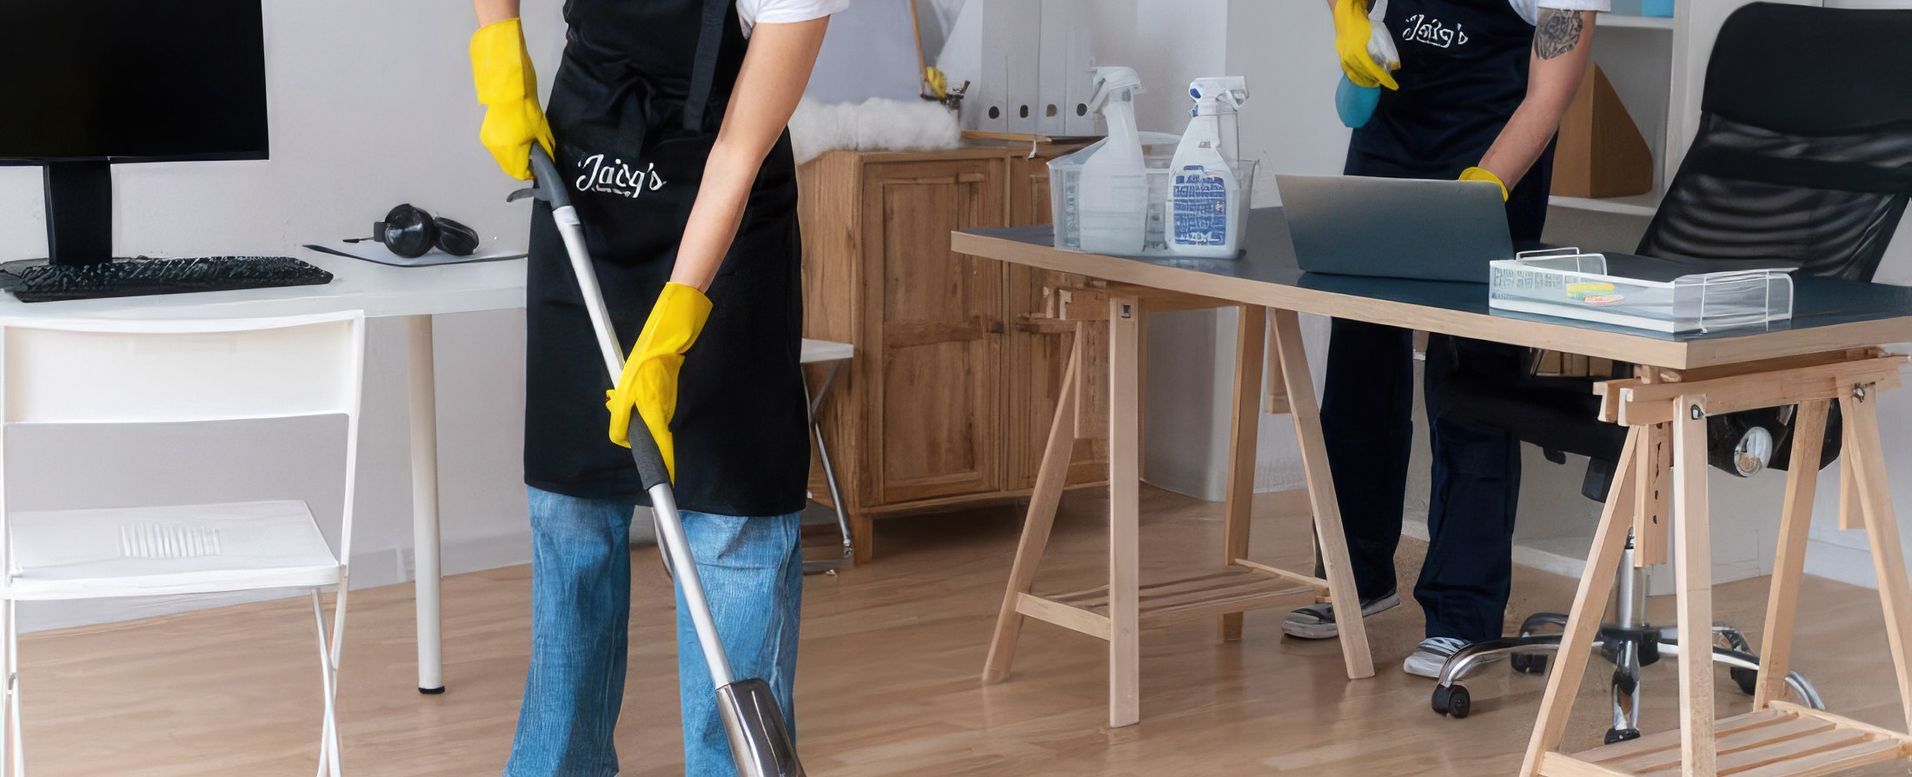 Jacq’s Cleaning Banner image